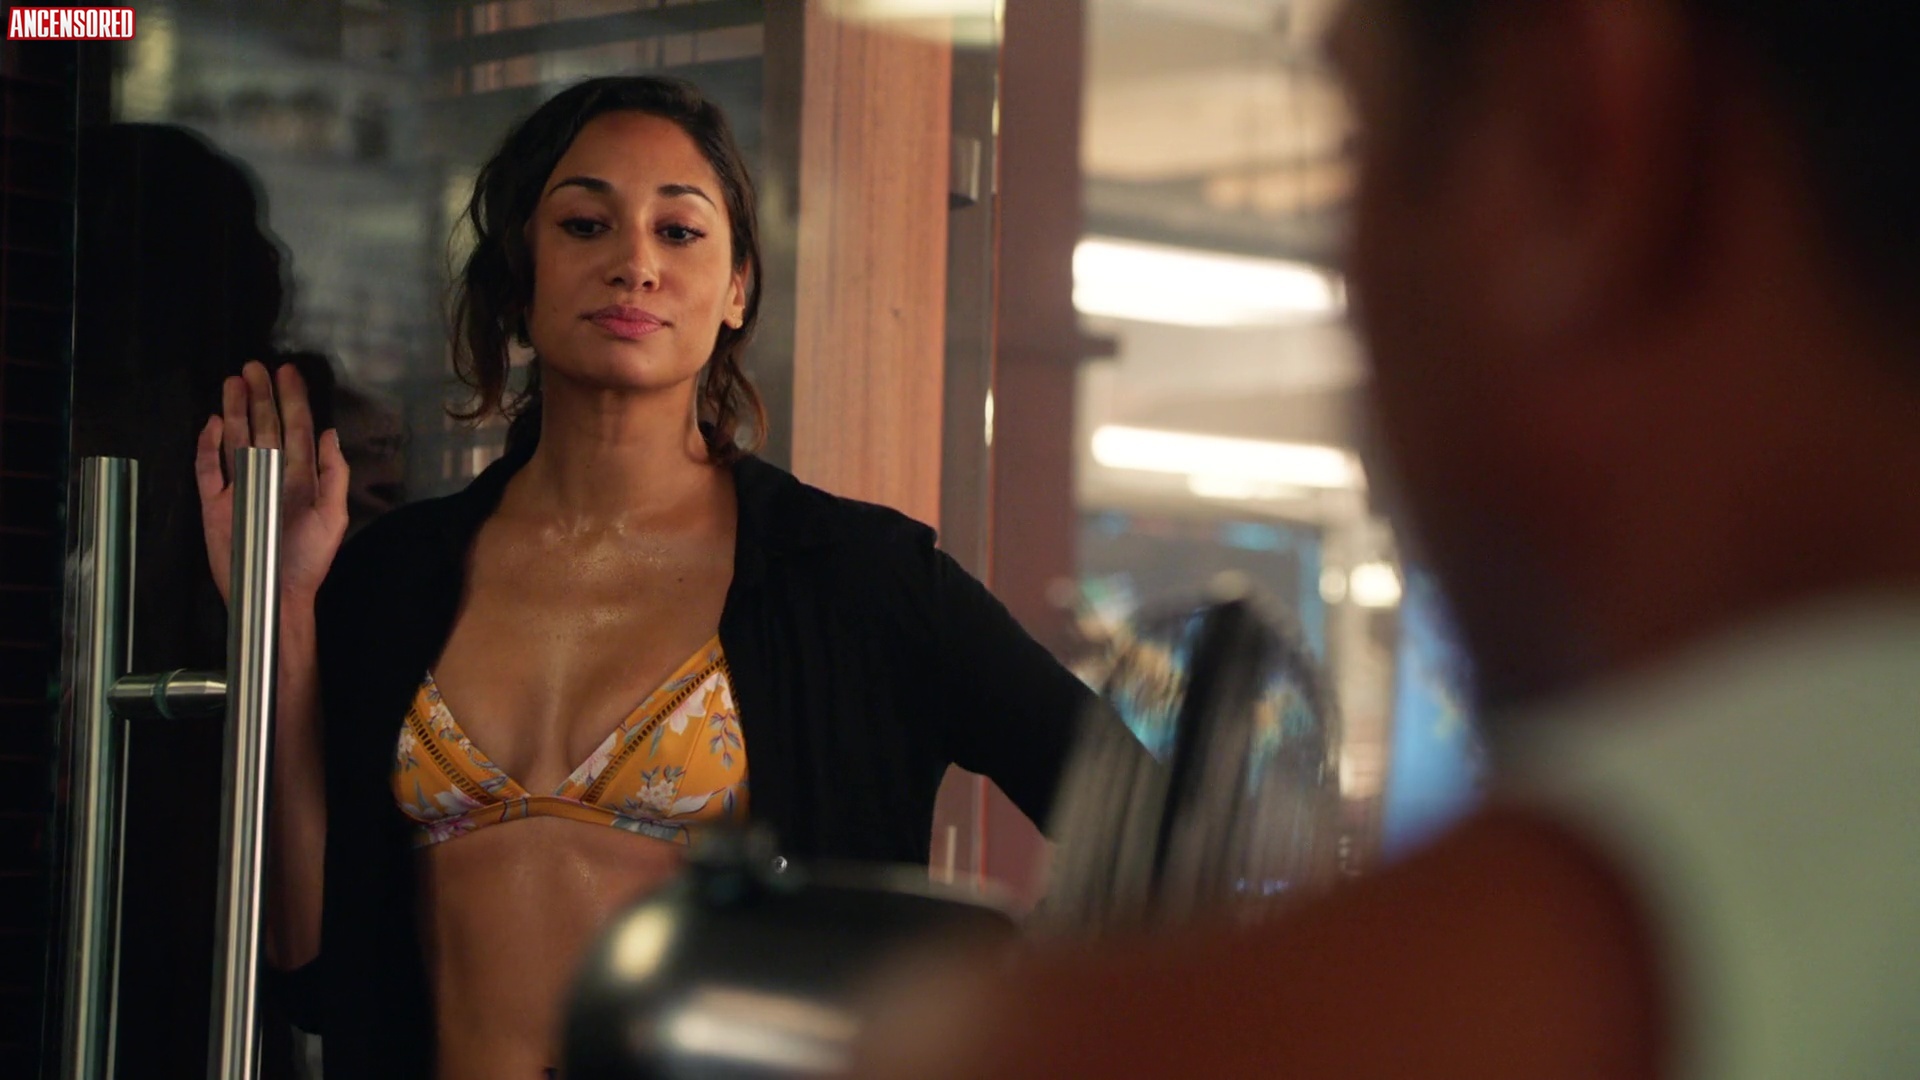 Meaghan Rath nude pics.